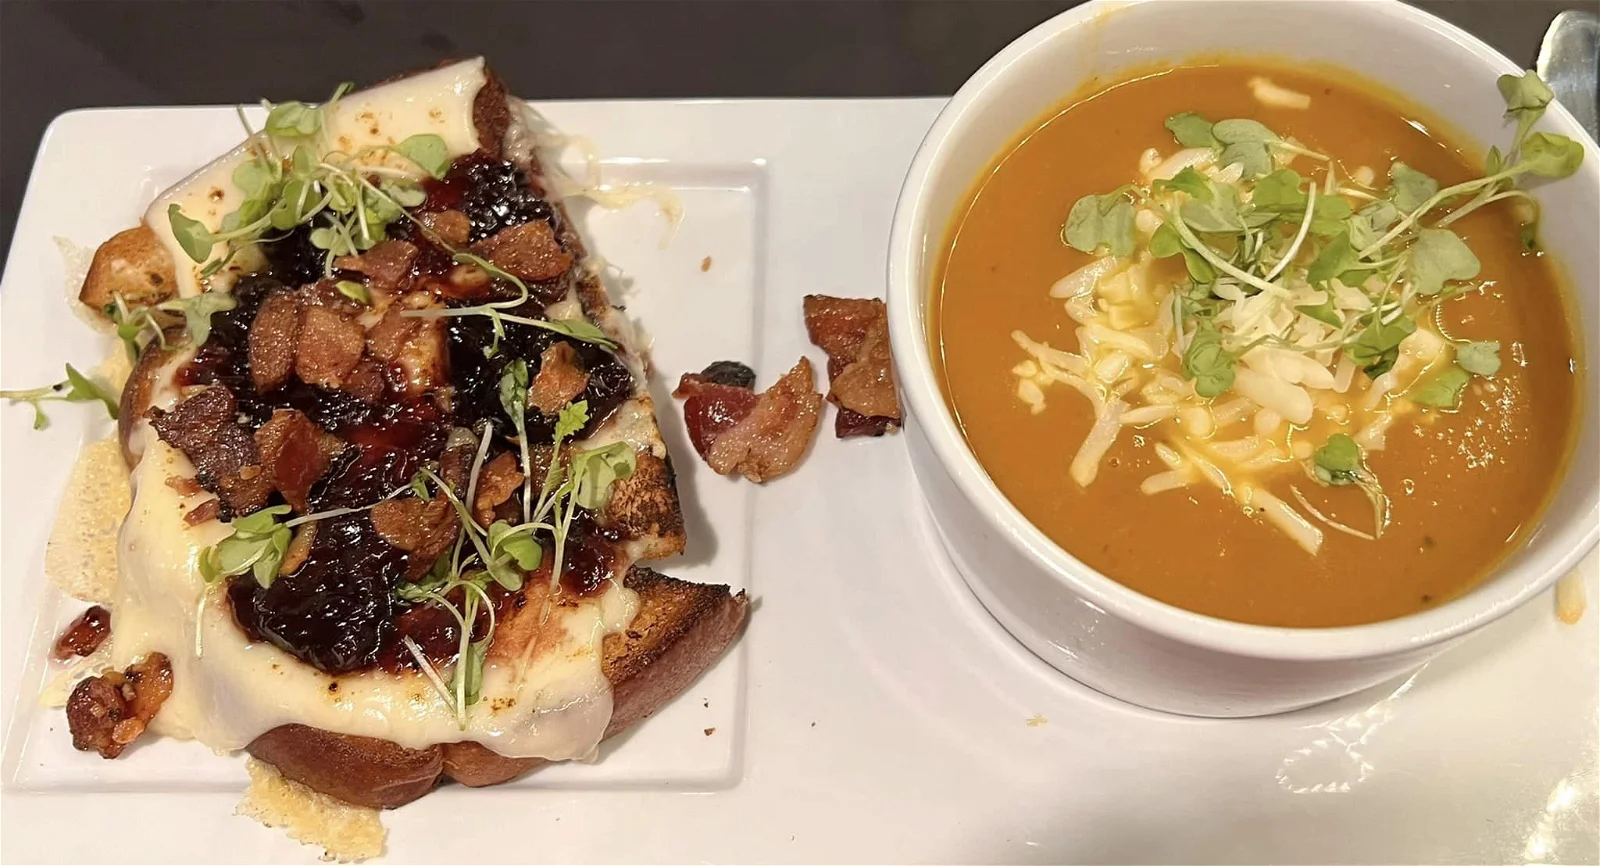 Bacon Jam Toast and Pumpkin Bisque from Sallies Cafe and Catering